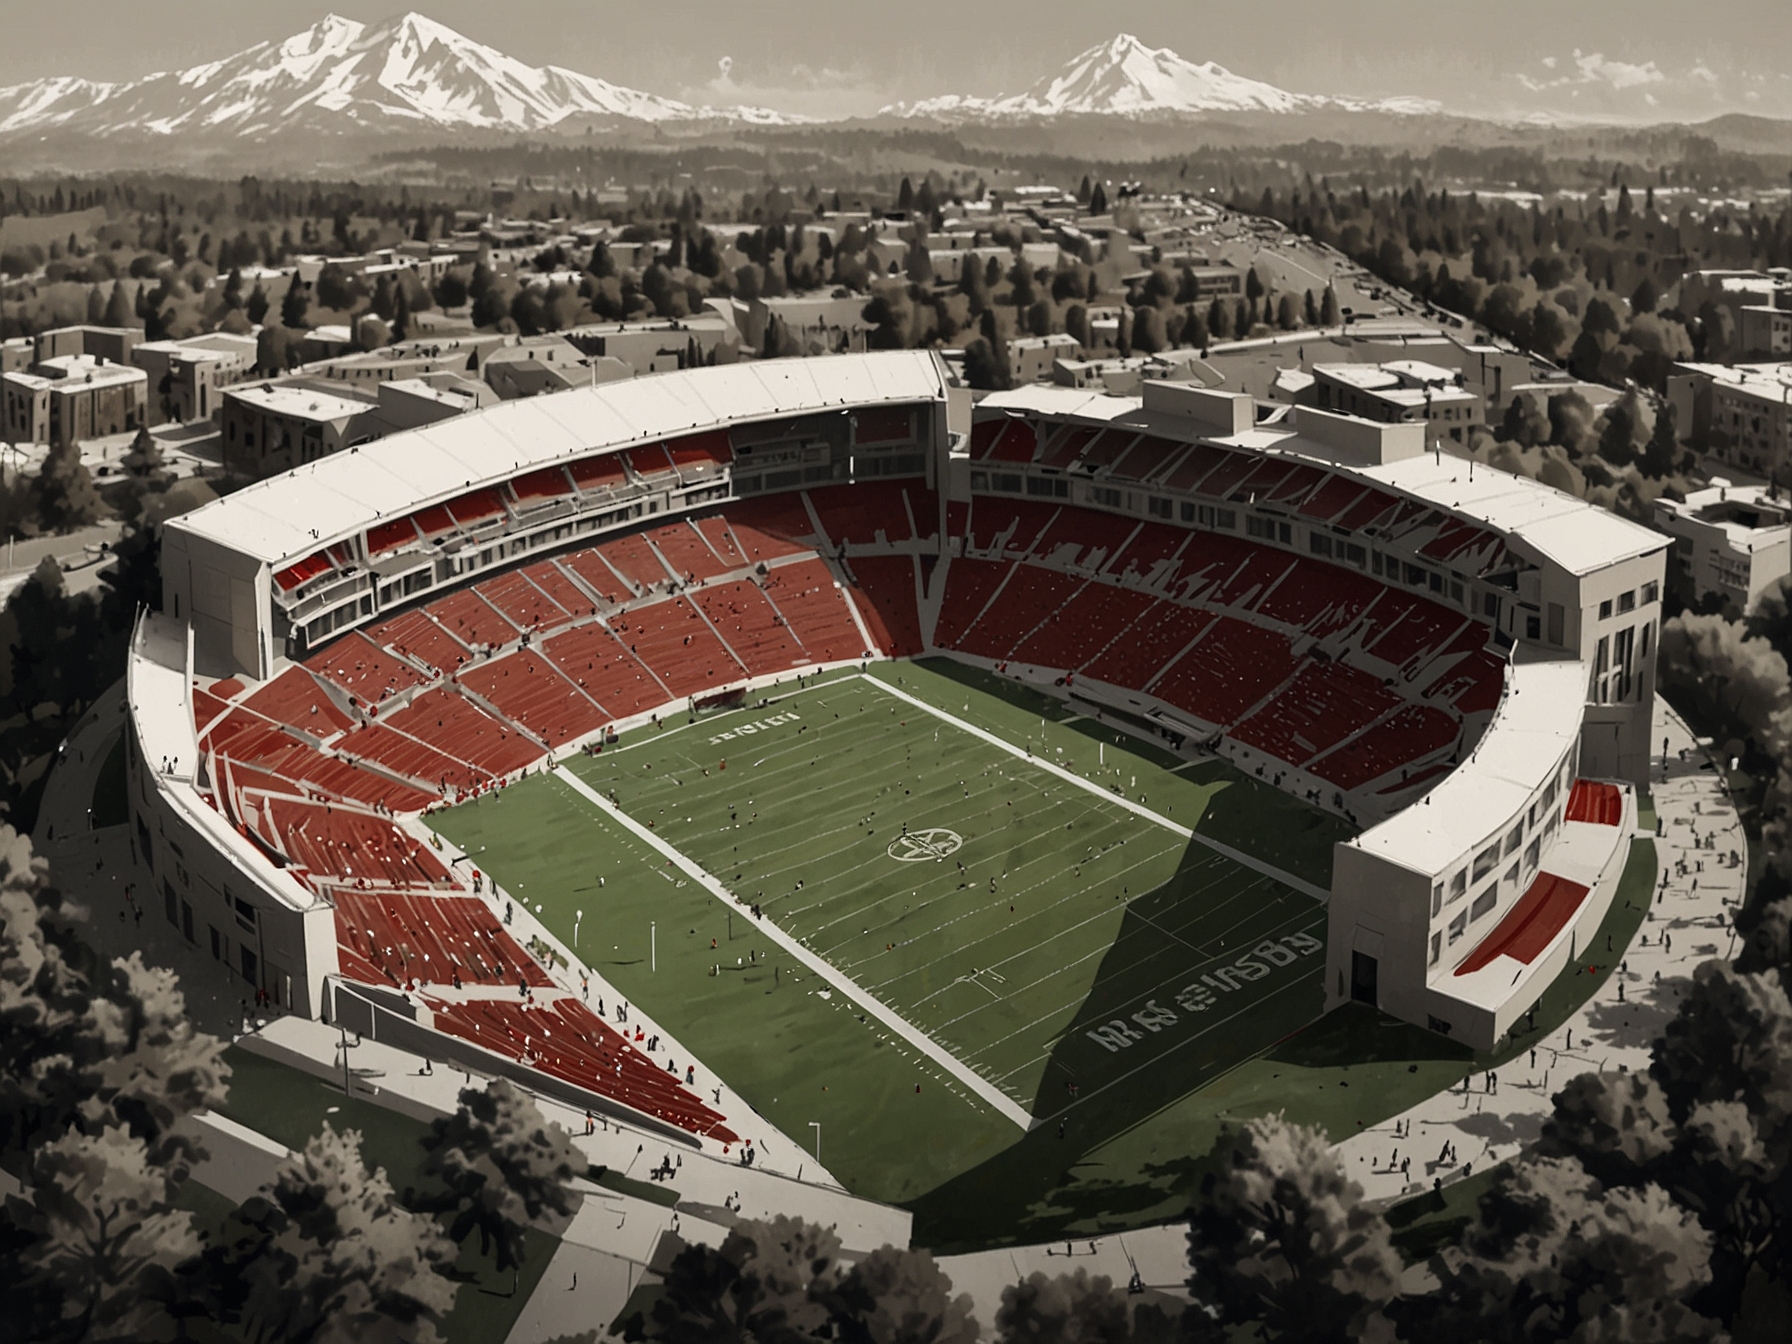 Aerial view of Washington State University's sports stadium during a game.